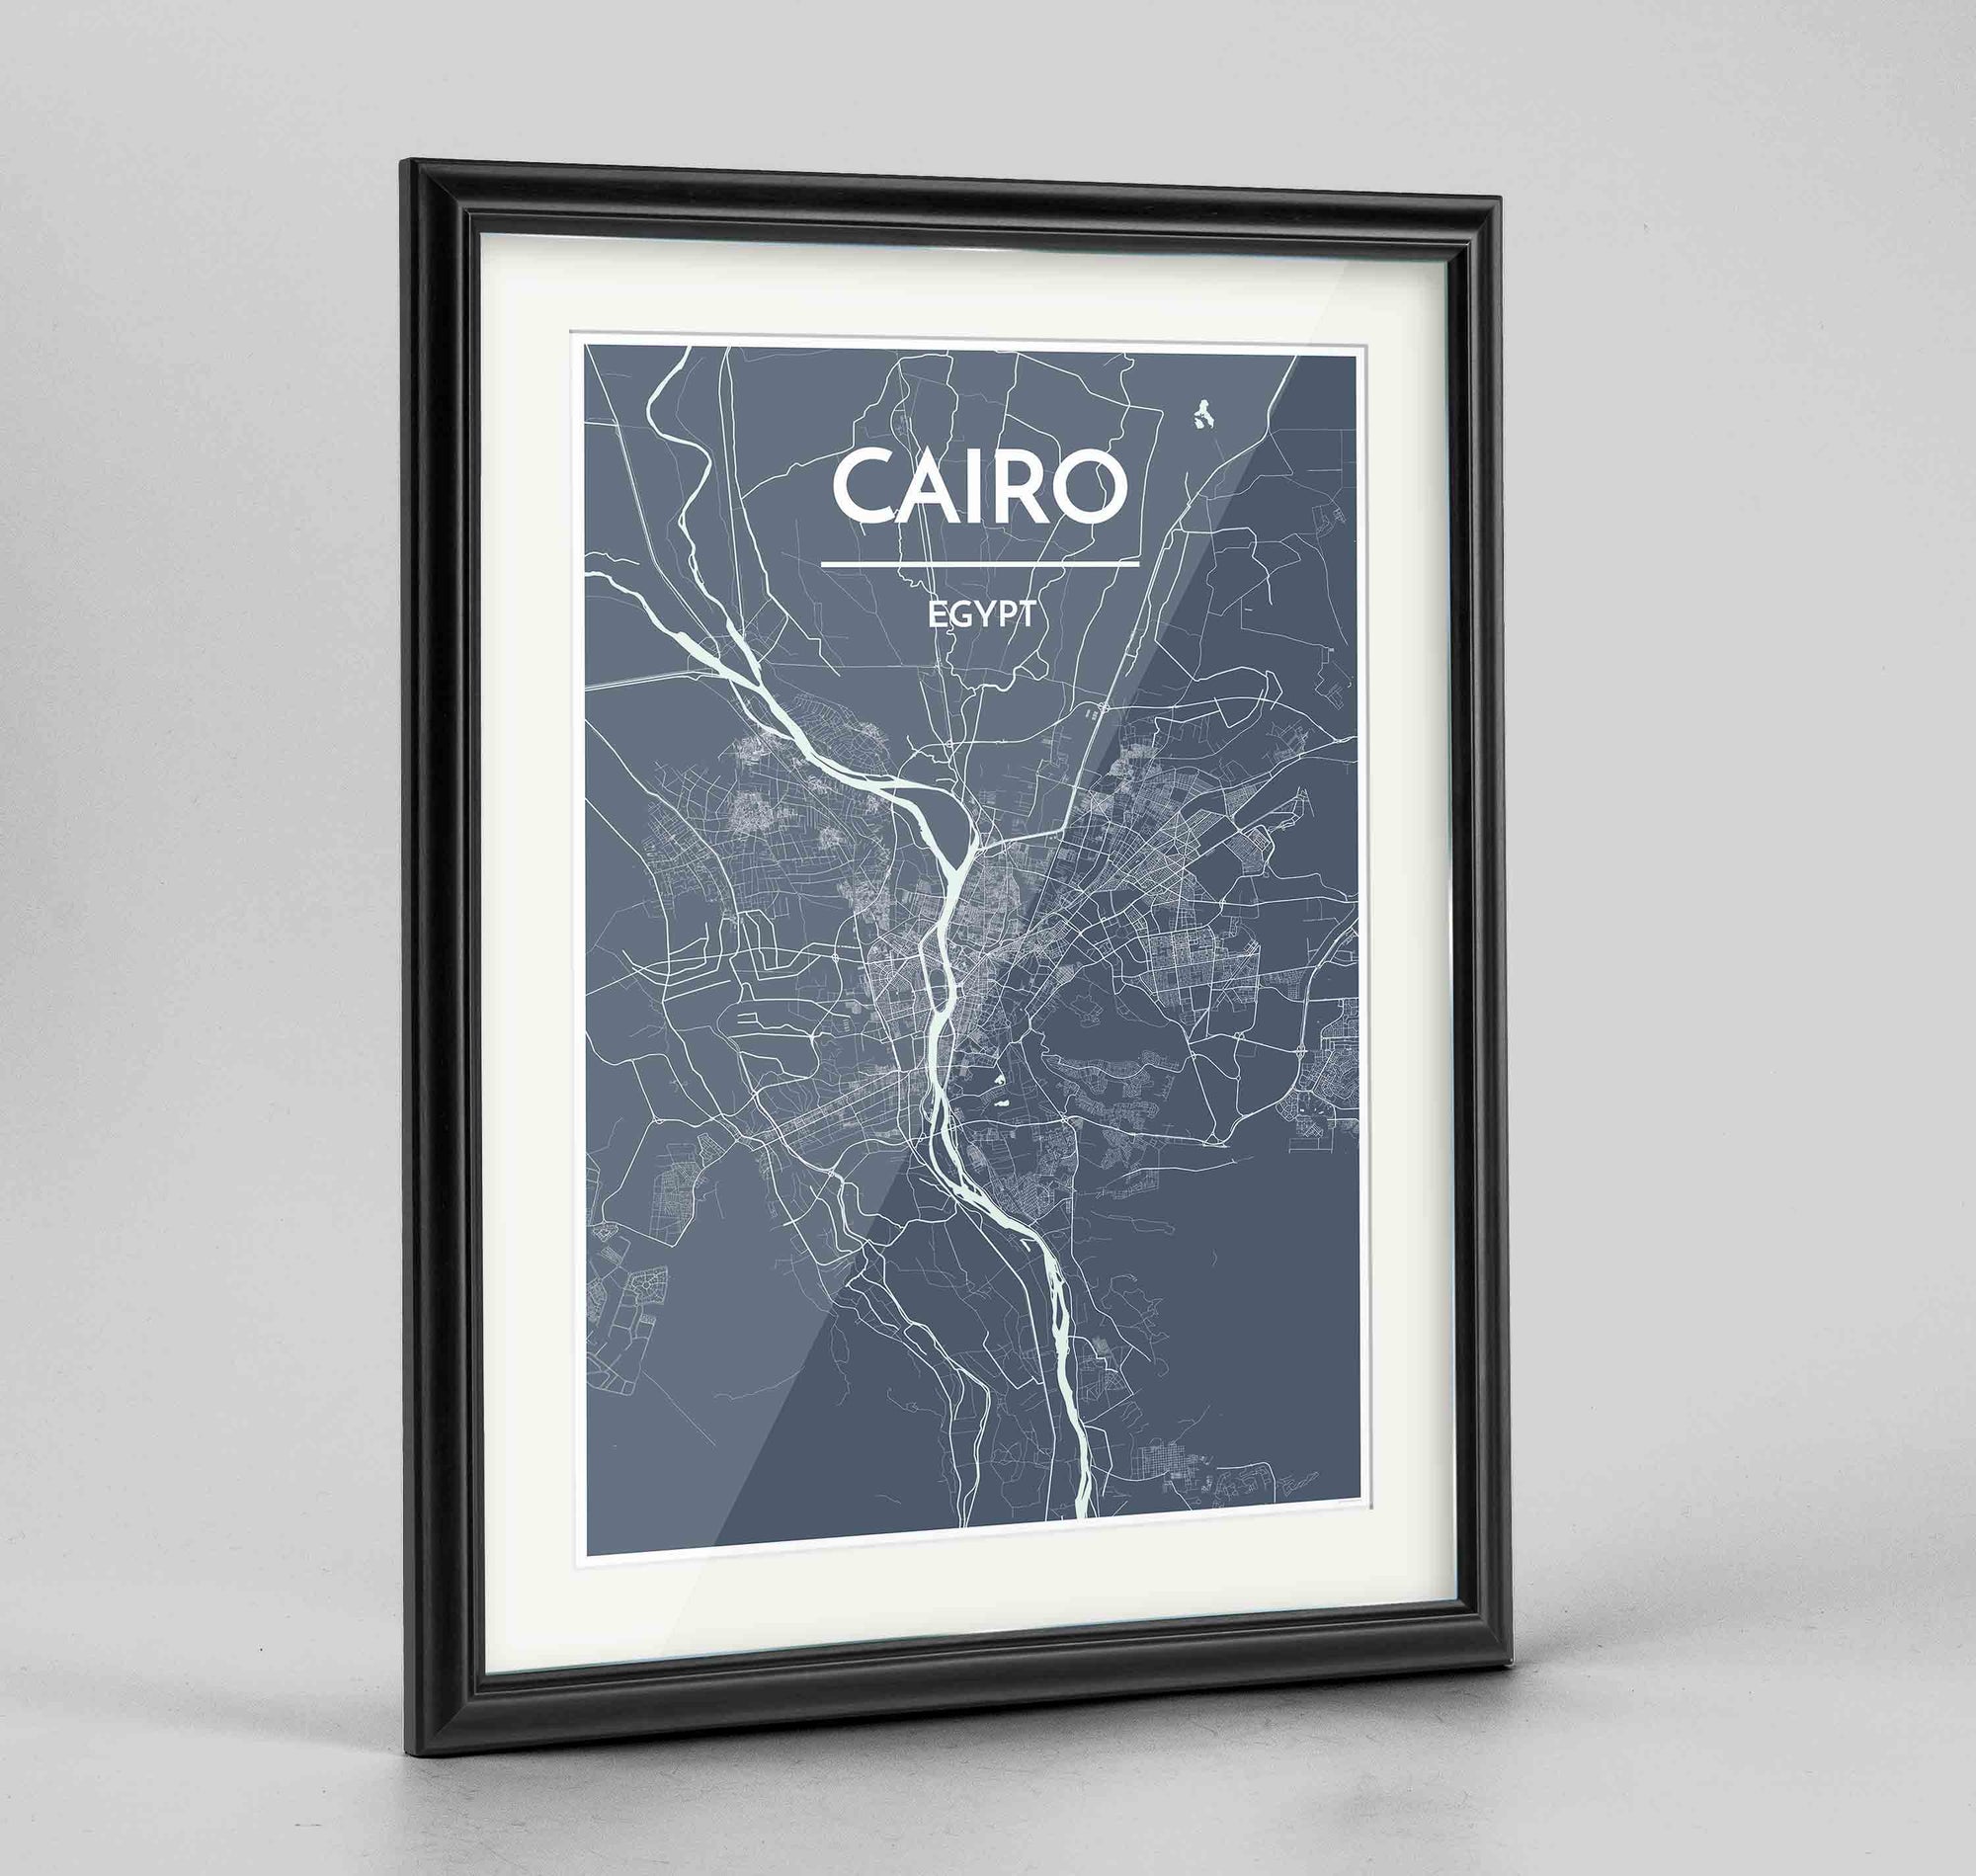 Framed Cairo Map Art Print 24x36" Traditional Black frame Point Two Design Group